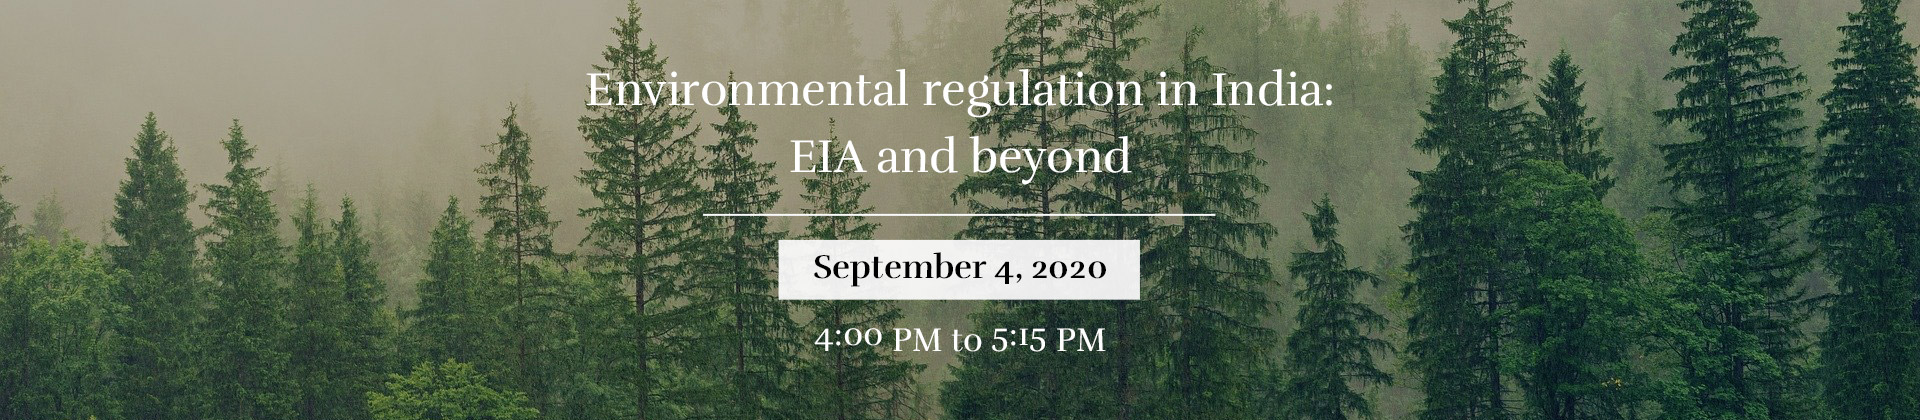 Environmental regulation in India: EIA and beyond